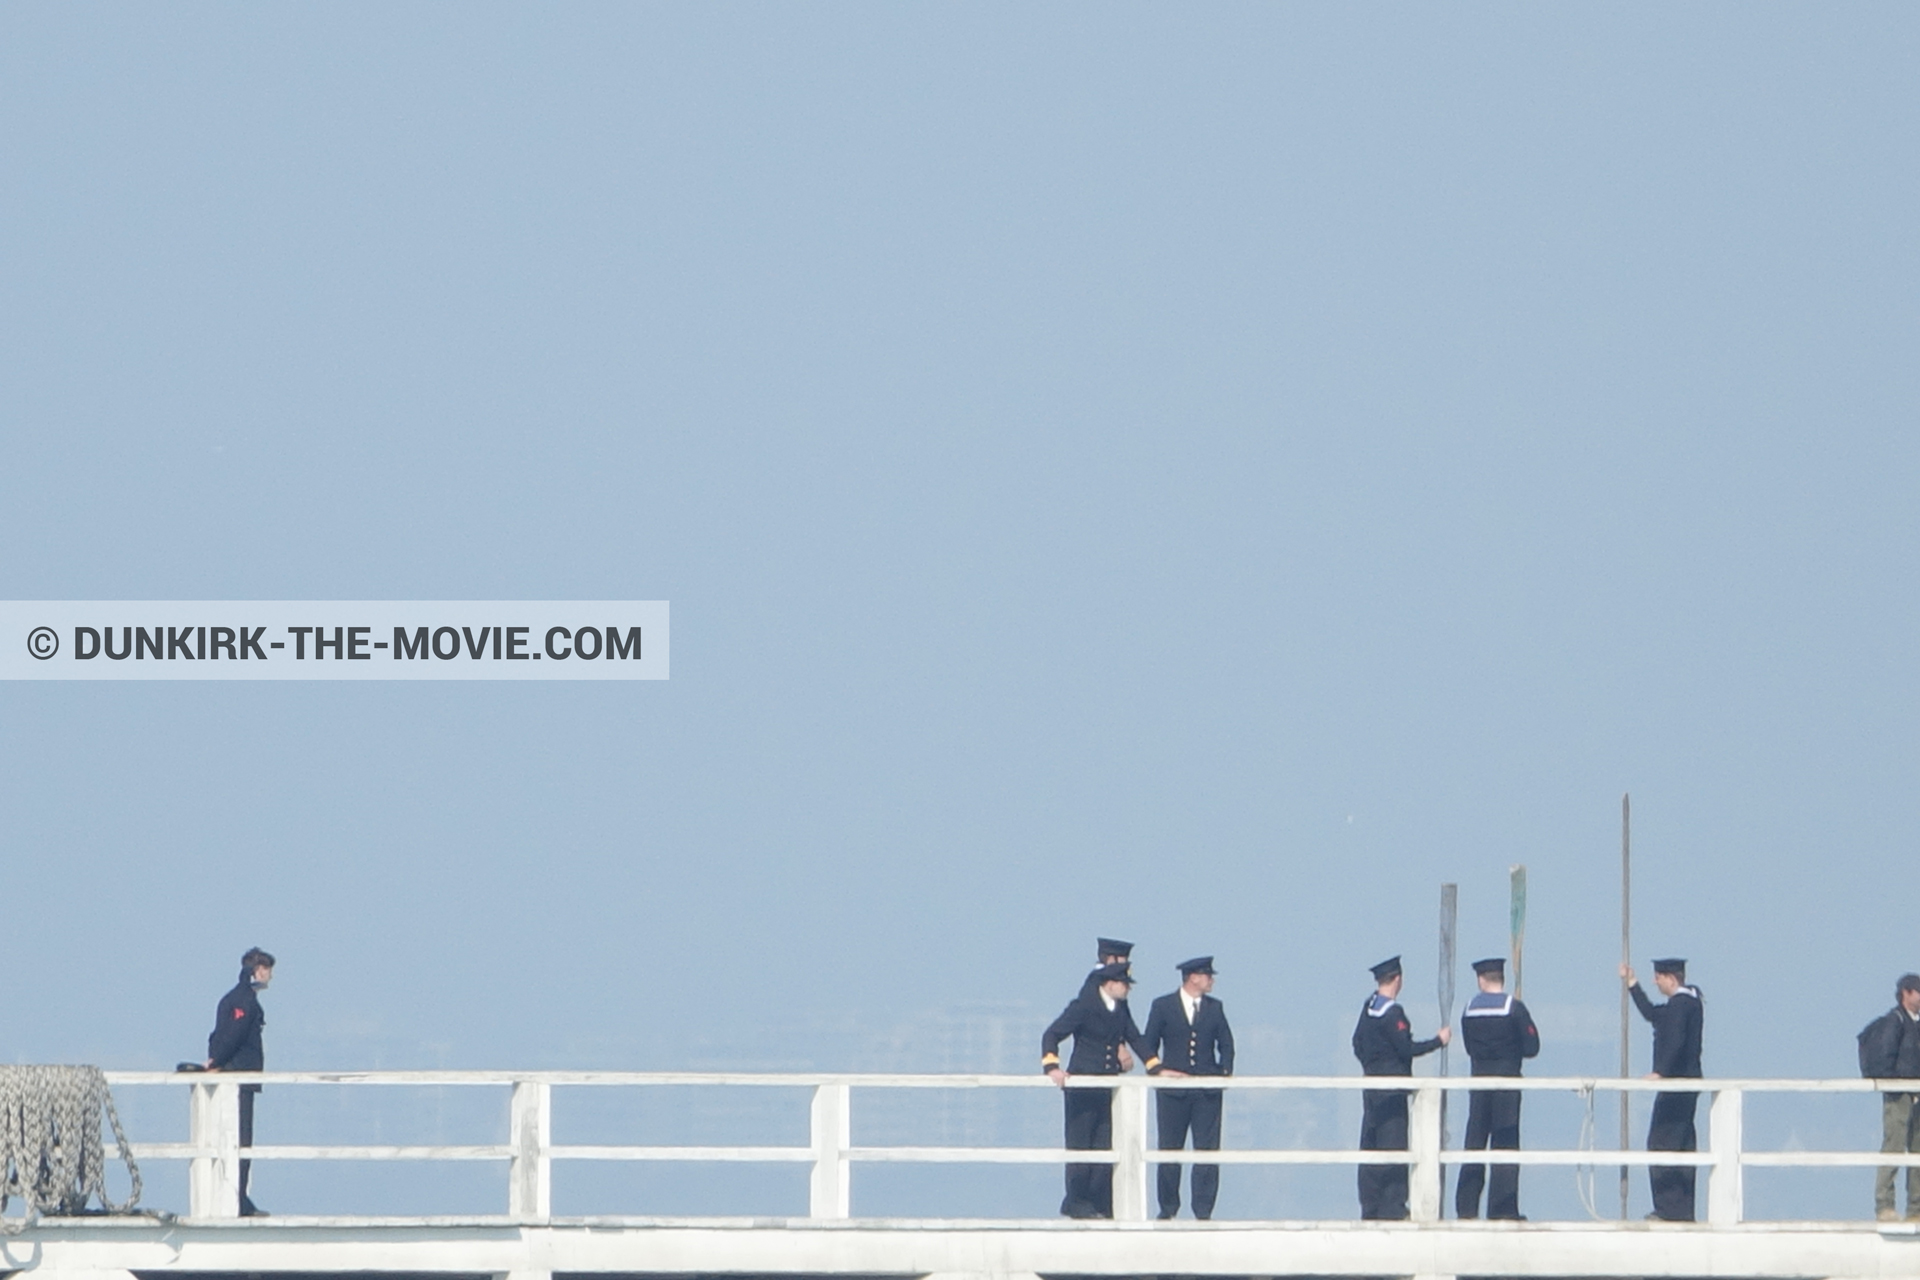 Picture with blue sky, supernumeraries, EST pier, technical team,  from behind the scene of the Dunkirk movie by Nolan